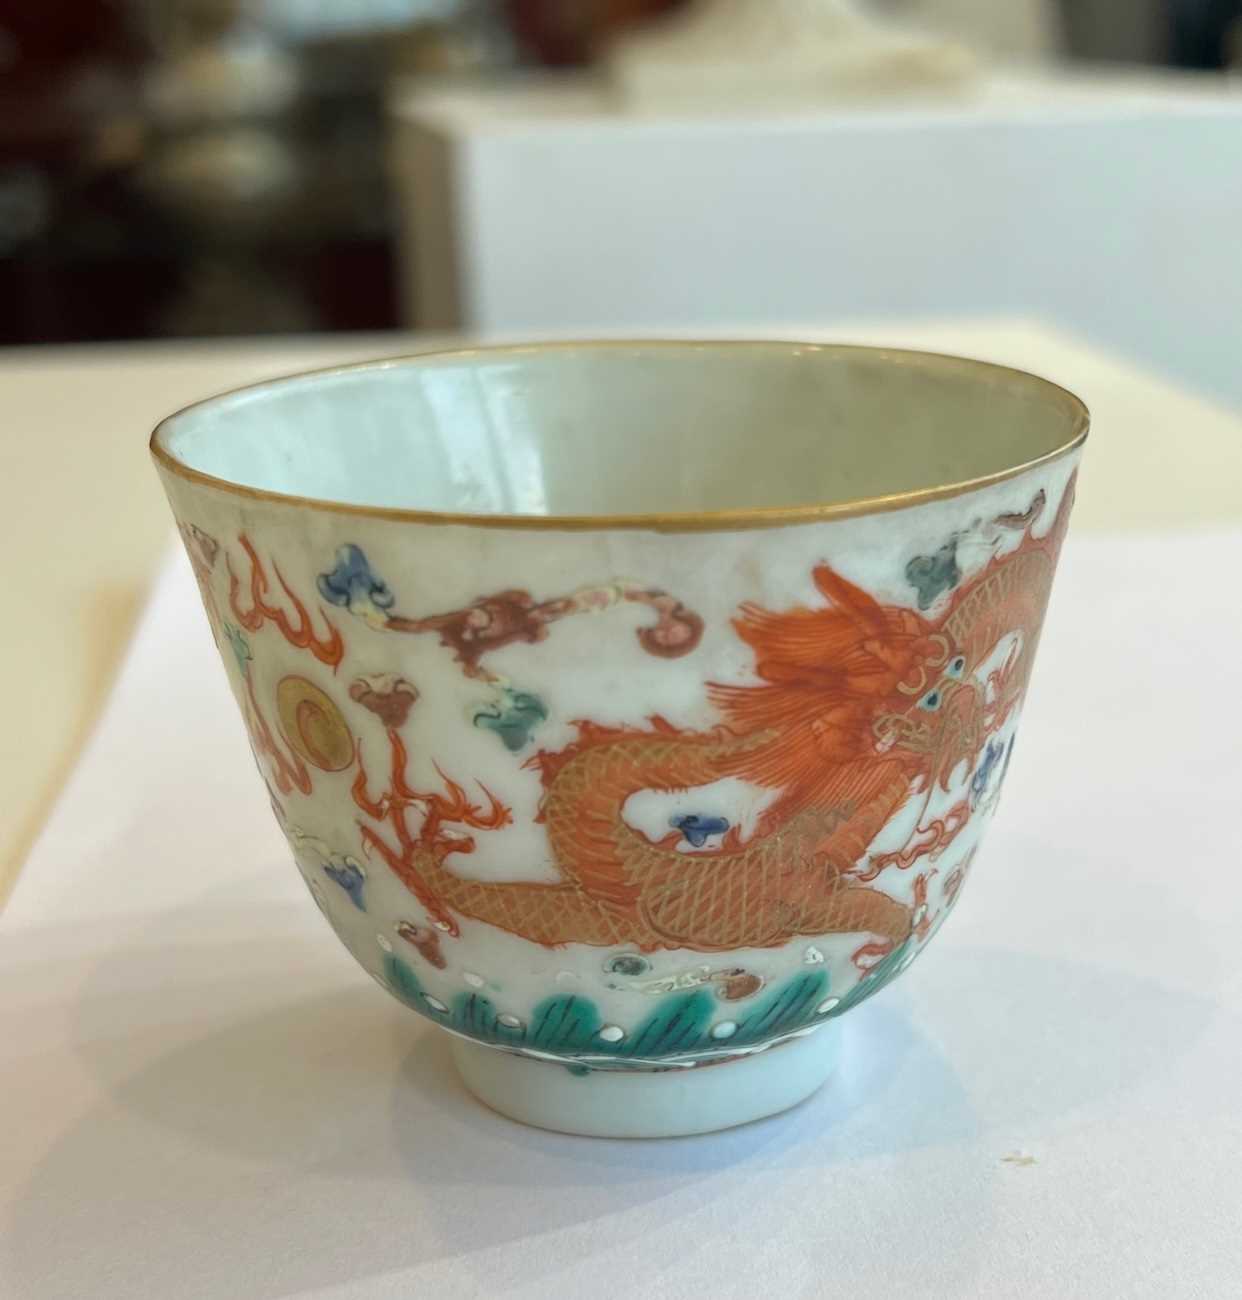 A 19TH CENTURY CHINESE GUANGXU PERIOD FAMILLE VERTE PORCELAIN WINE CUP - Image 10 of 11